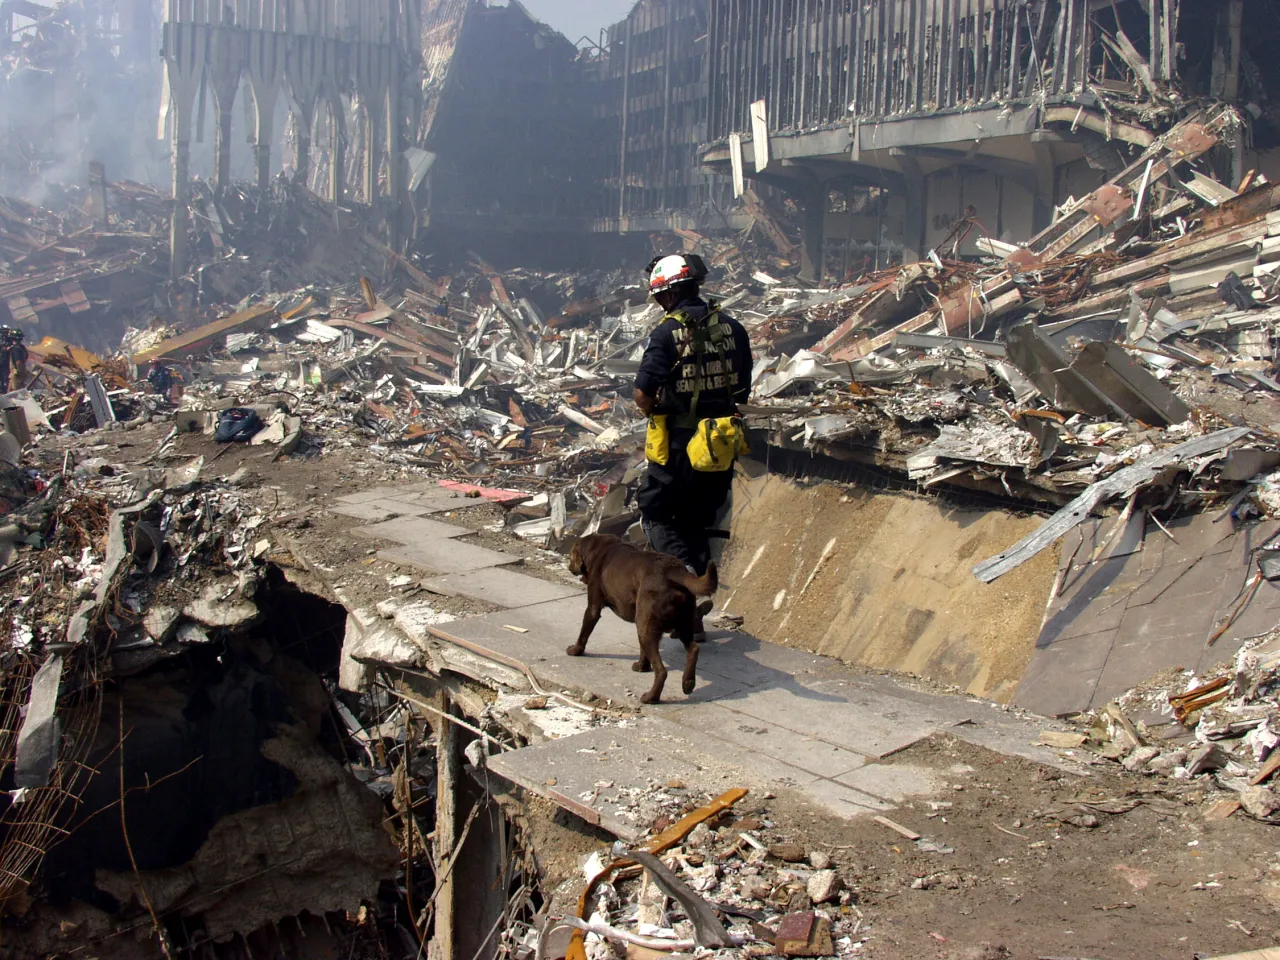 Image: 9/11 - Urban Search and Rescue teams continue to search for survivors amongst the wreckage at the World Trade Center (3)